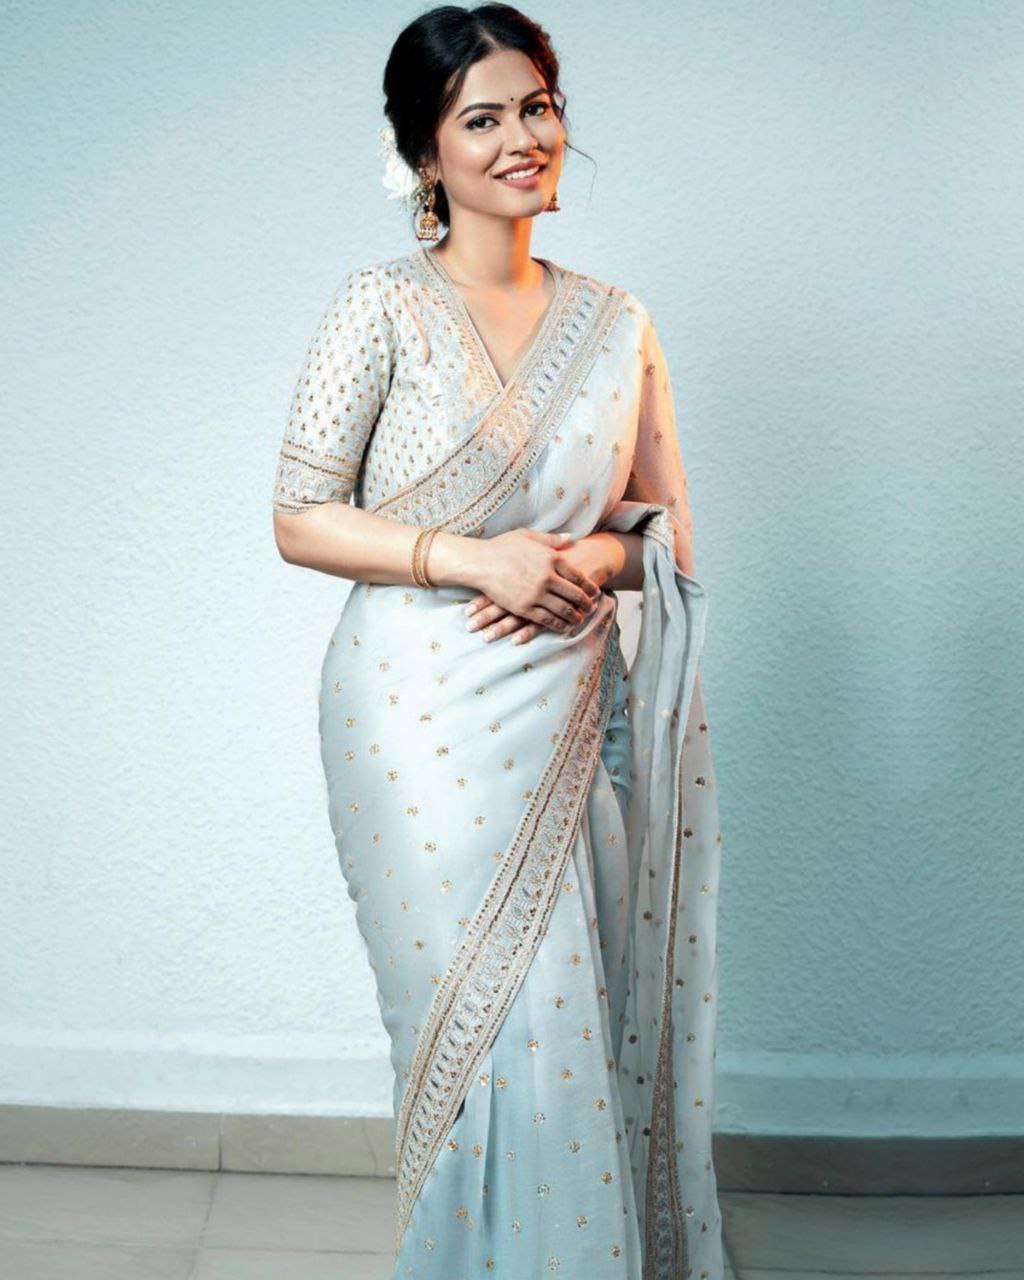 Ace The Slim Look By Draping These Handloom Designer Sarees